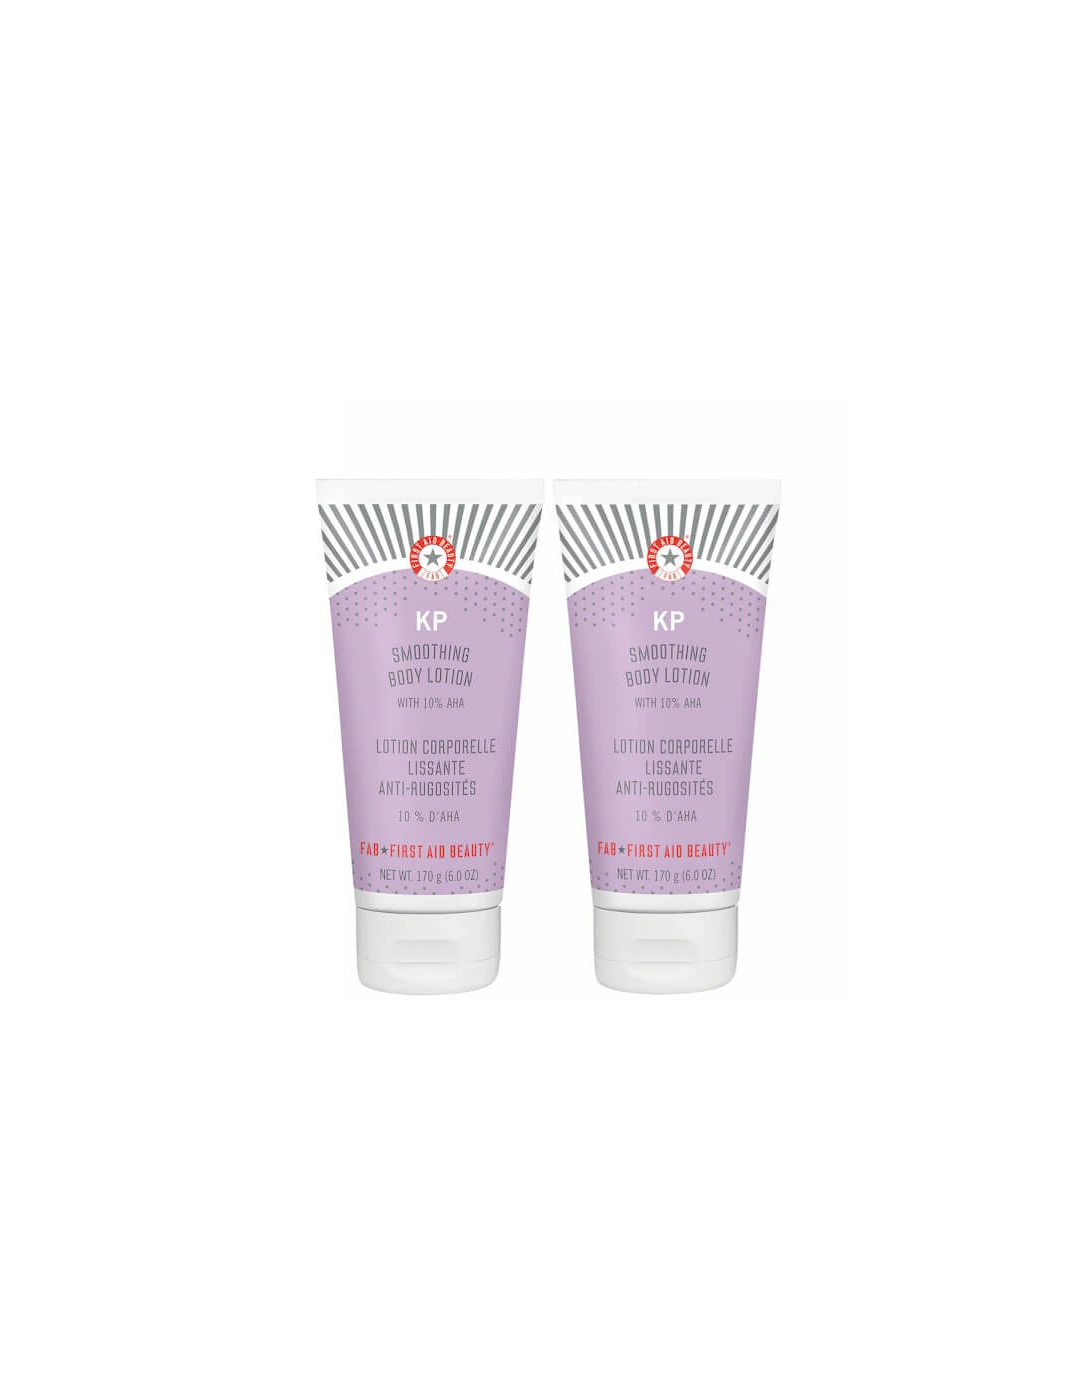 KP Smoothing Body Lotion Duo, 2 of 1